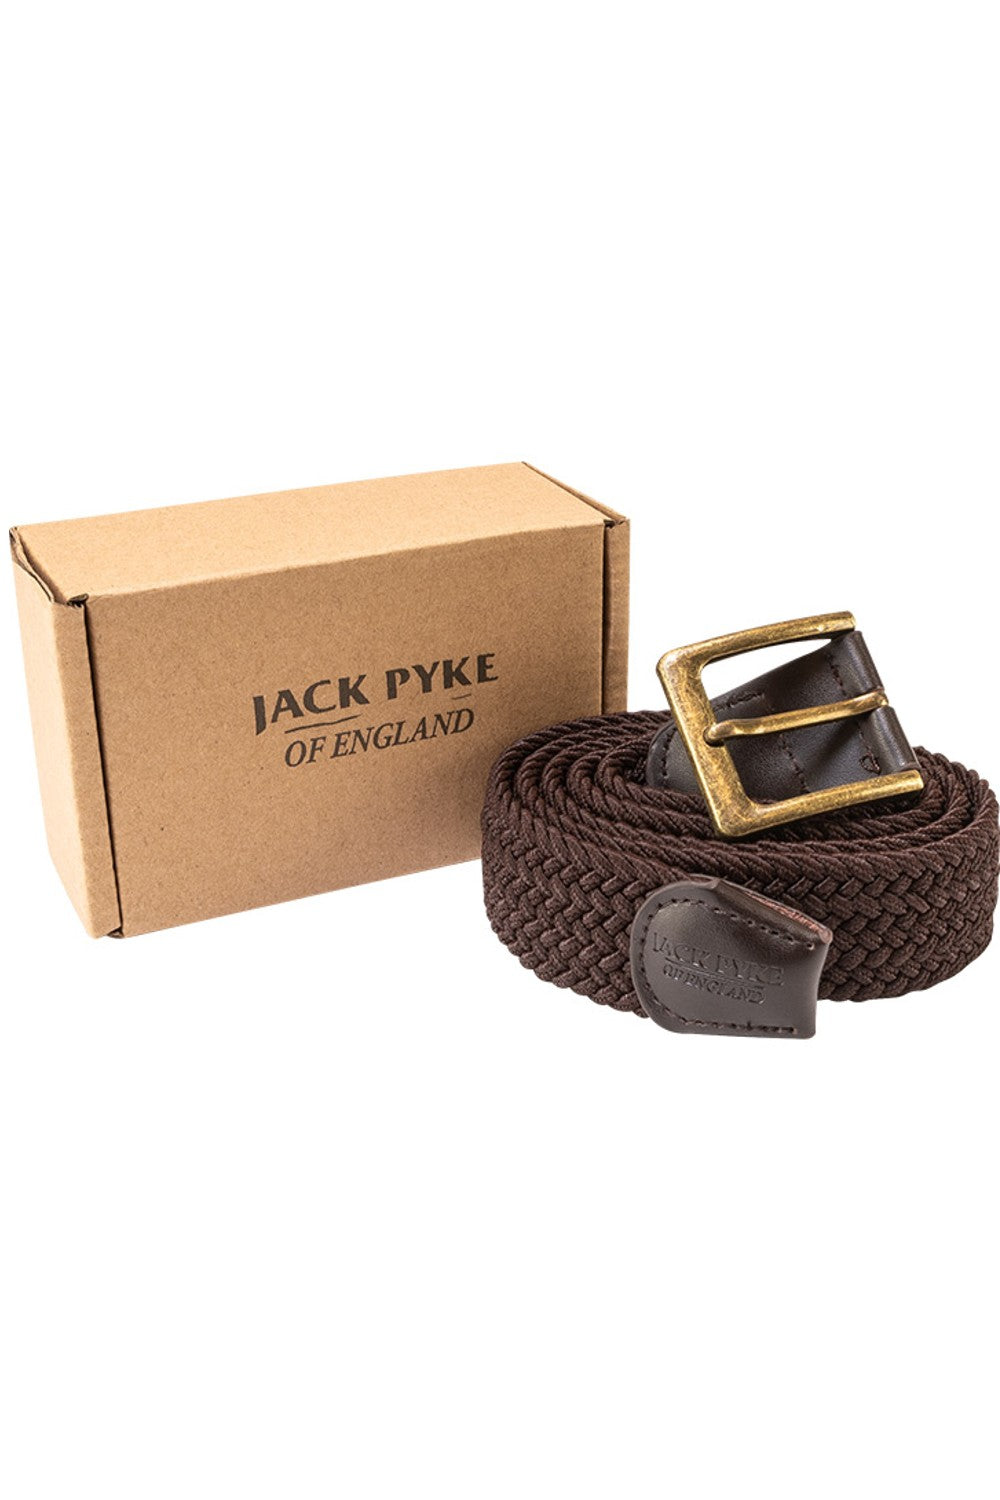 Jack Pyke Countryman Elasticated Belt in Brown with a presentation box  